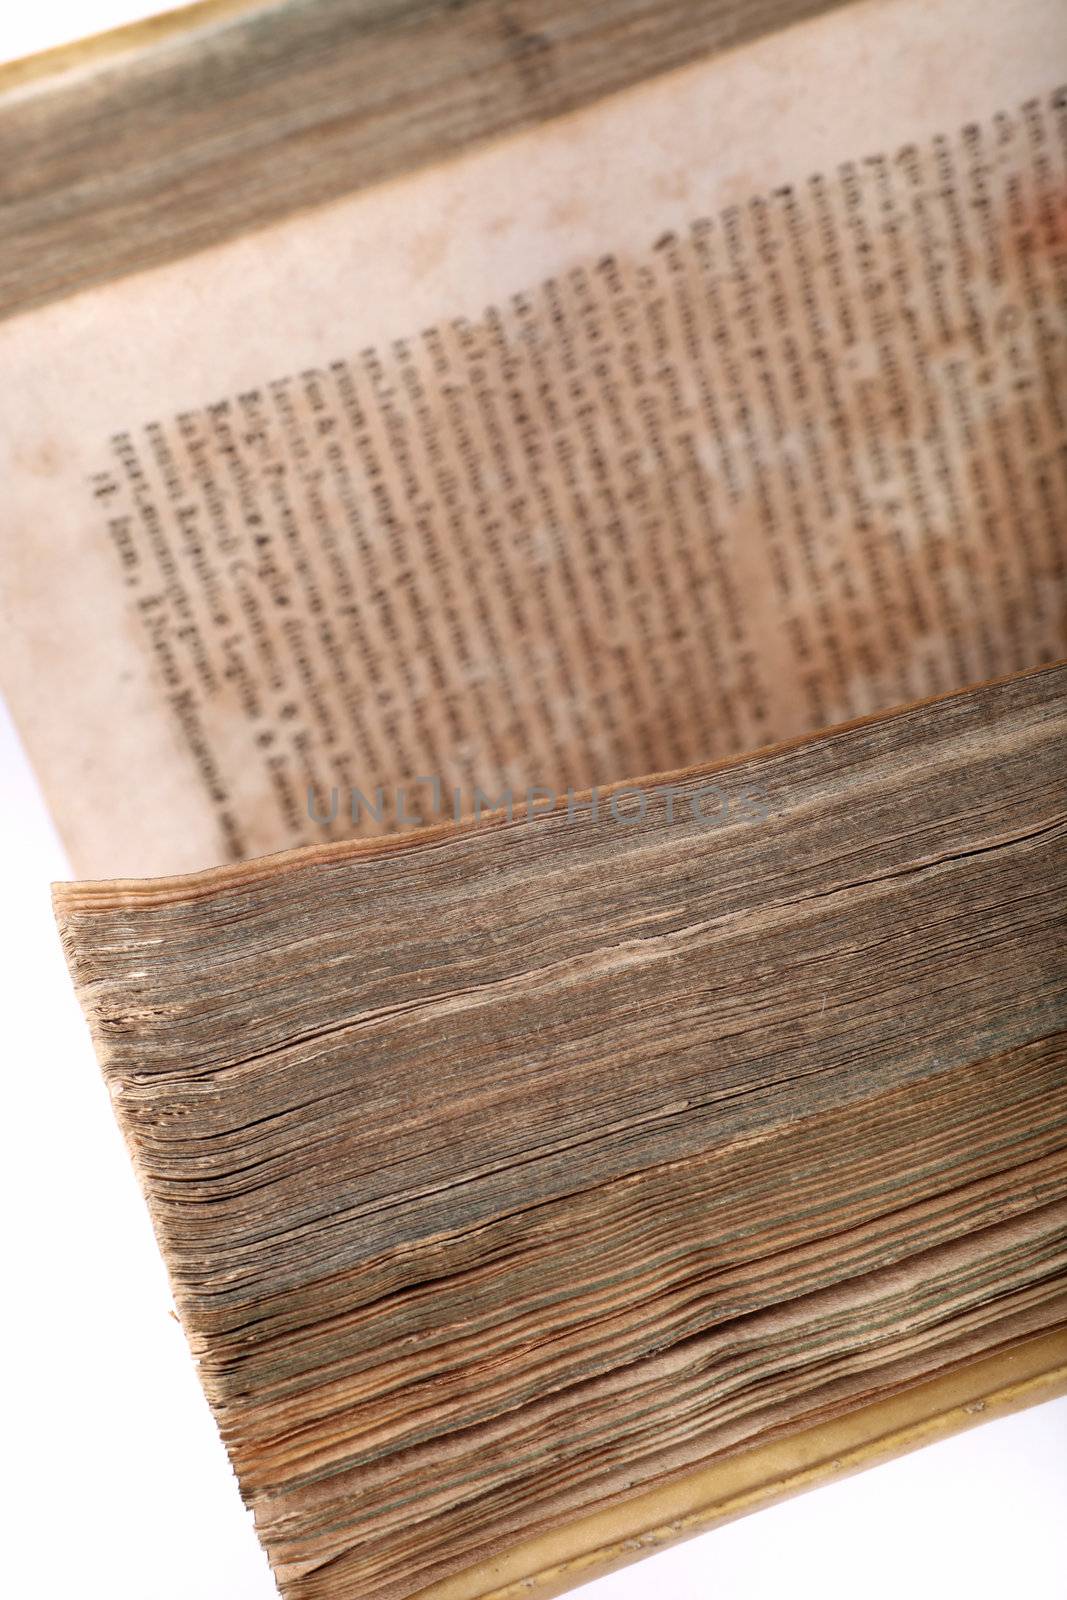 Close up of the pages of an open old book